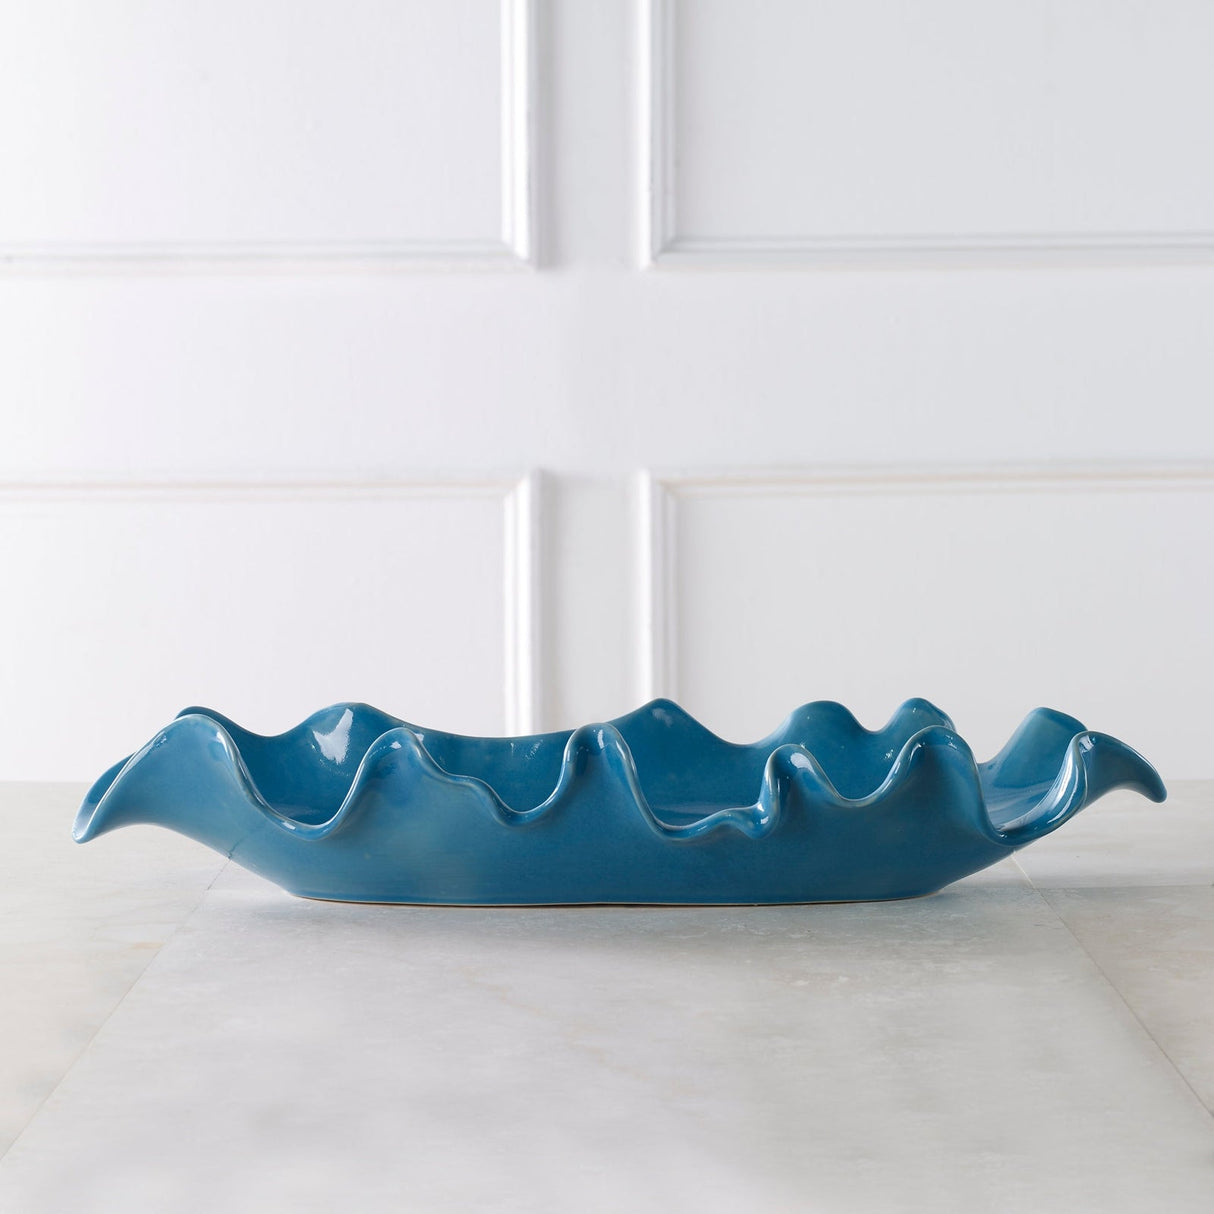 Uttermost Ruffled Feathers Blue Bowl - Home Elegance USA